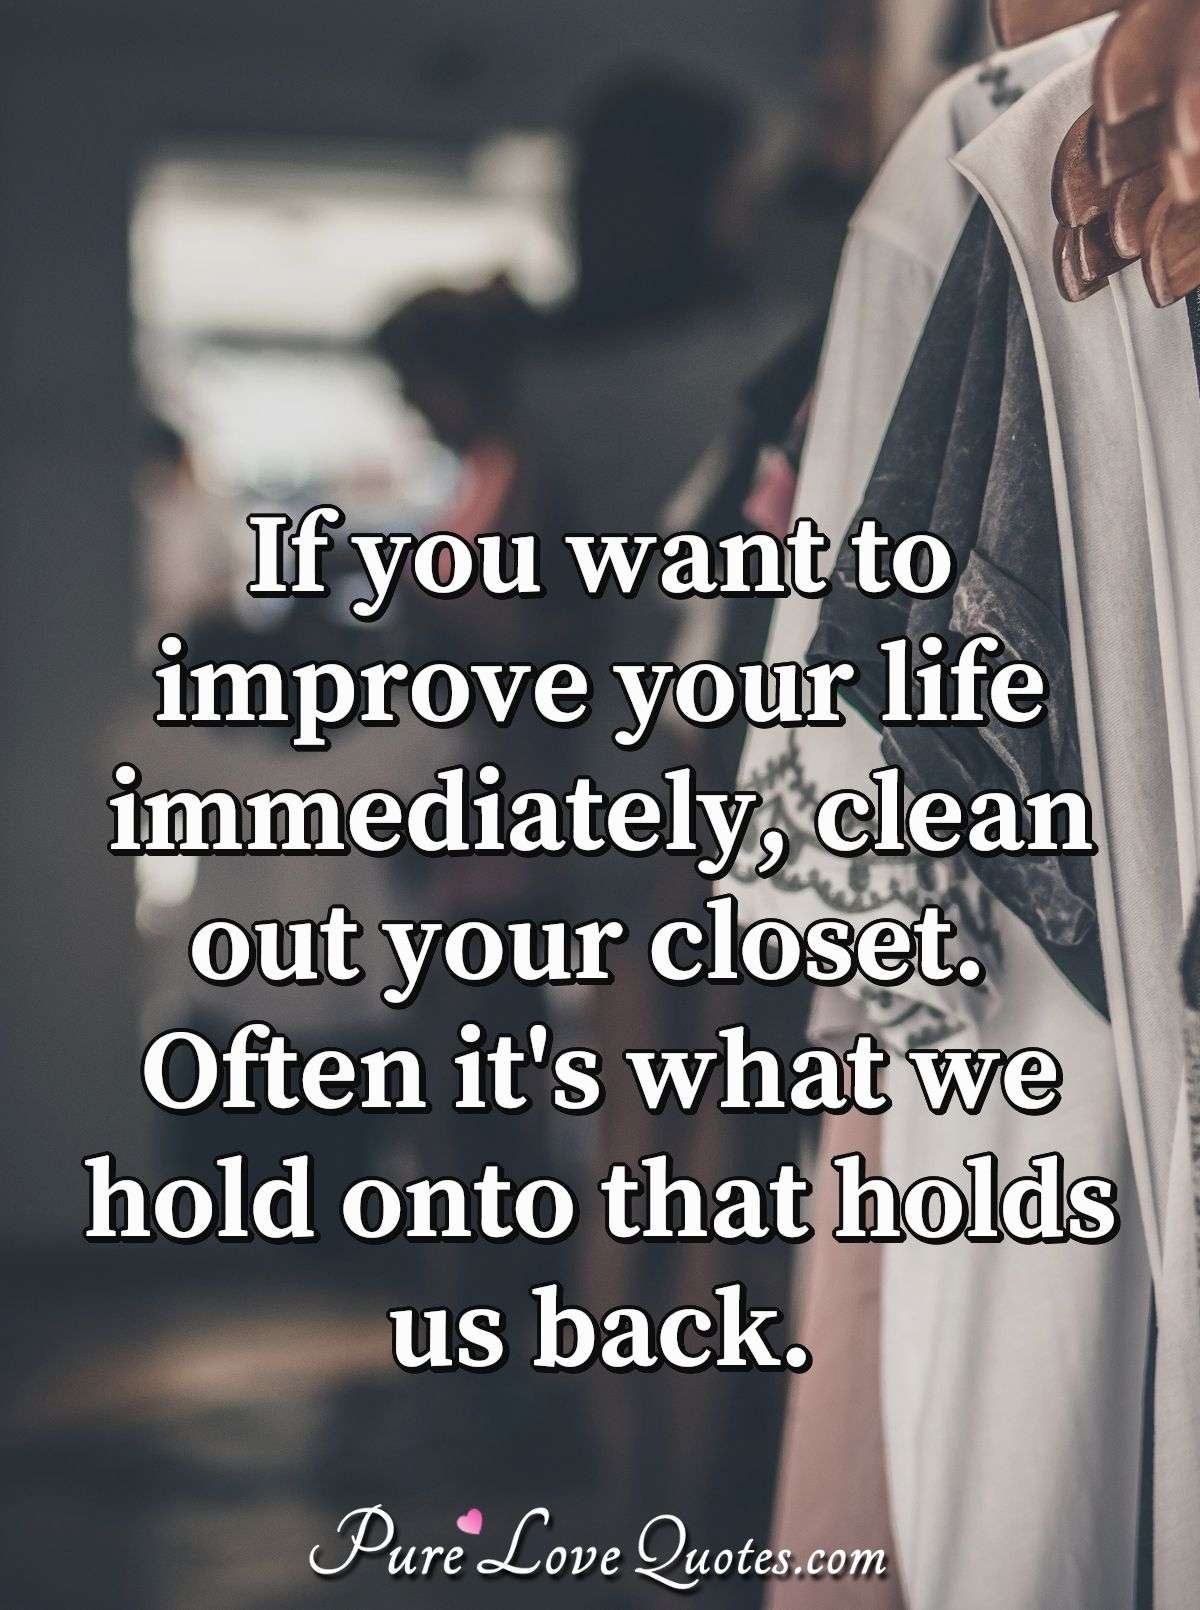 If you want to improve your life immediately, clean out your closet. Often it's what we hold onto that holds us back. - Anonymous